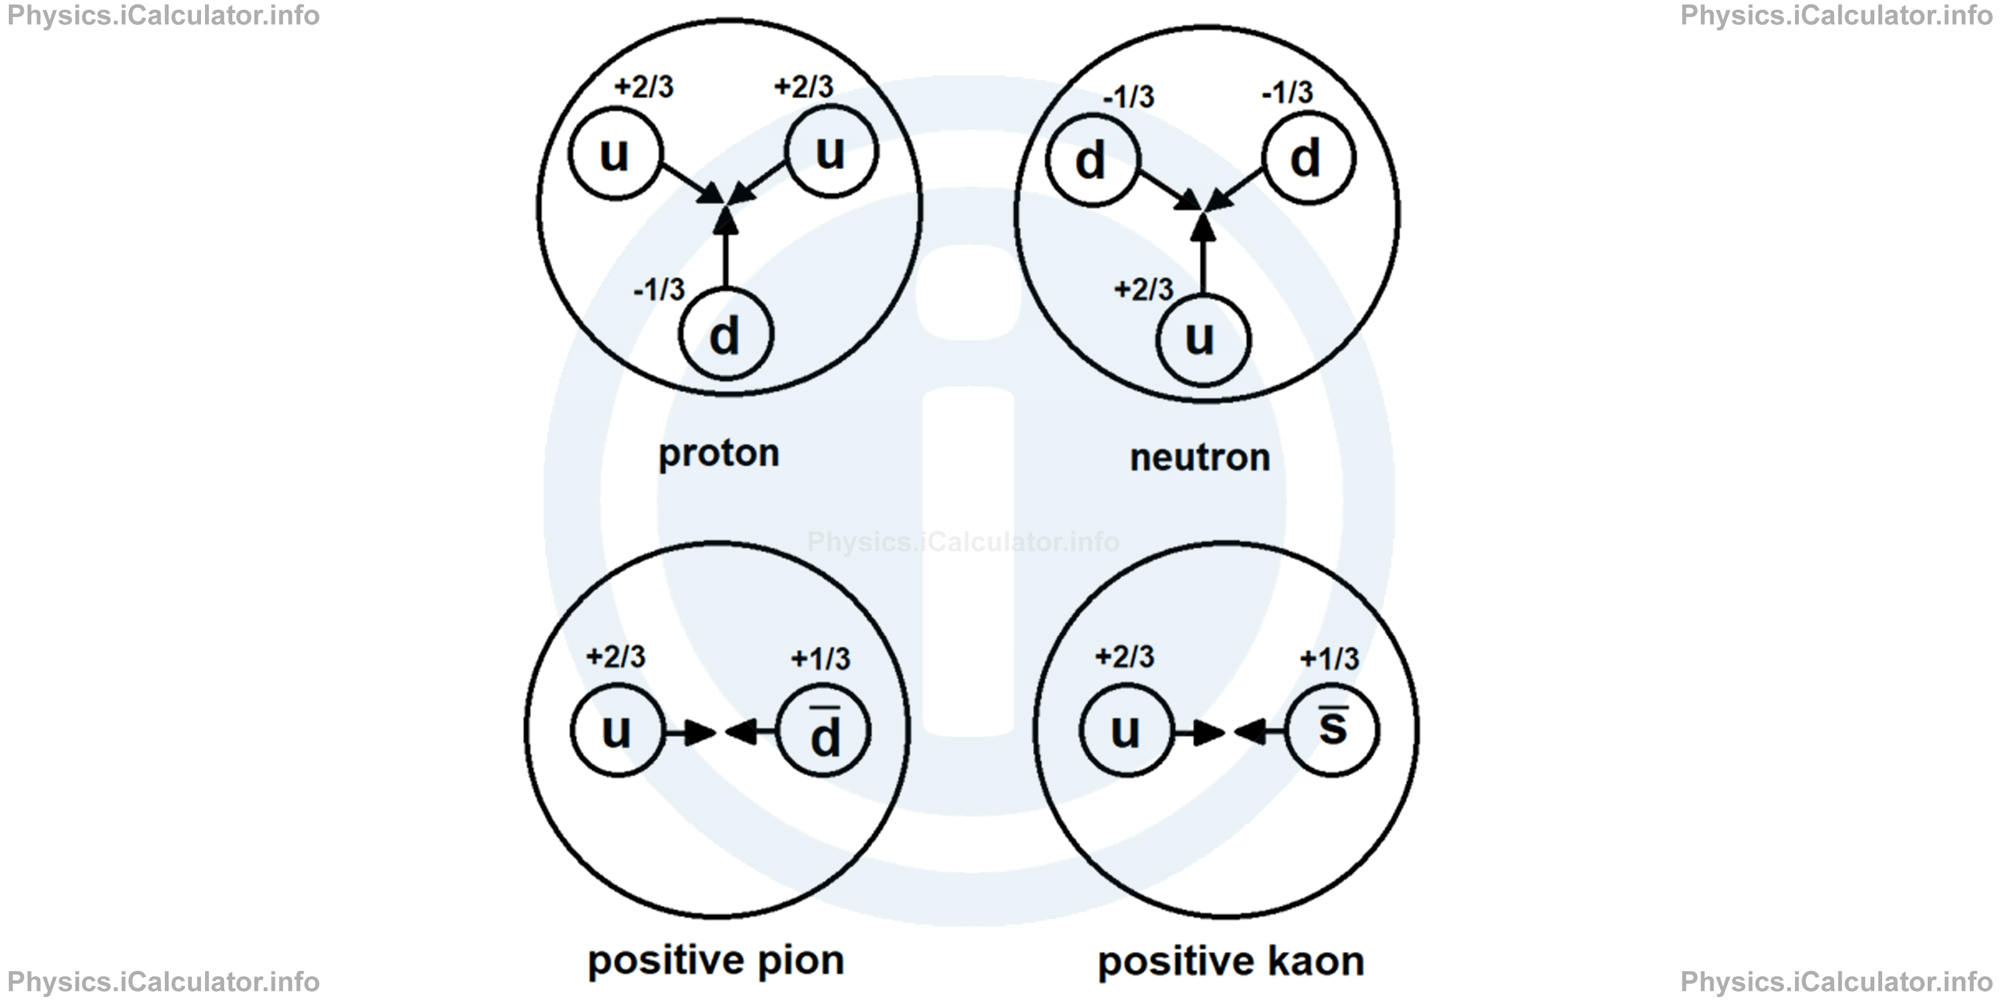 Physics Tutorials: This image provides visual information for the physics tutorial Classification of Elementary Particles. Quarks and Charm 